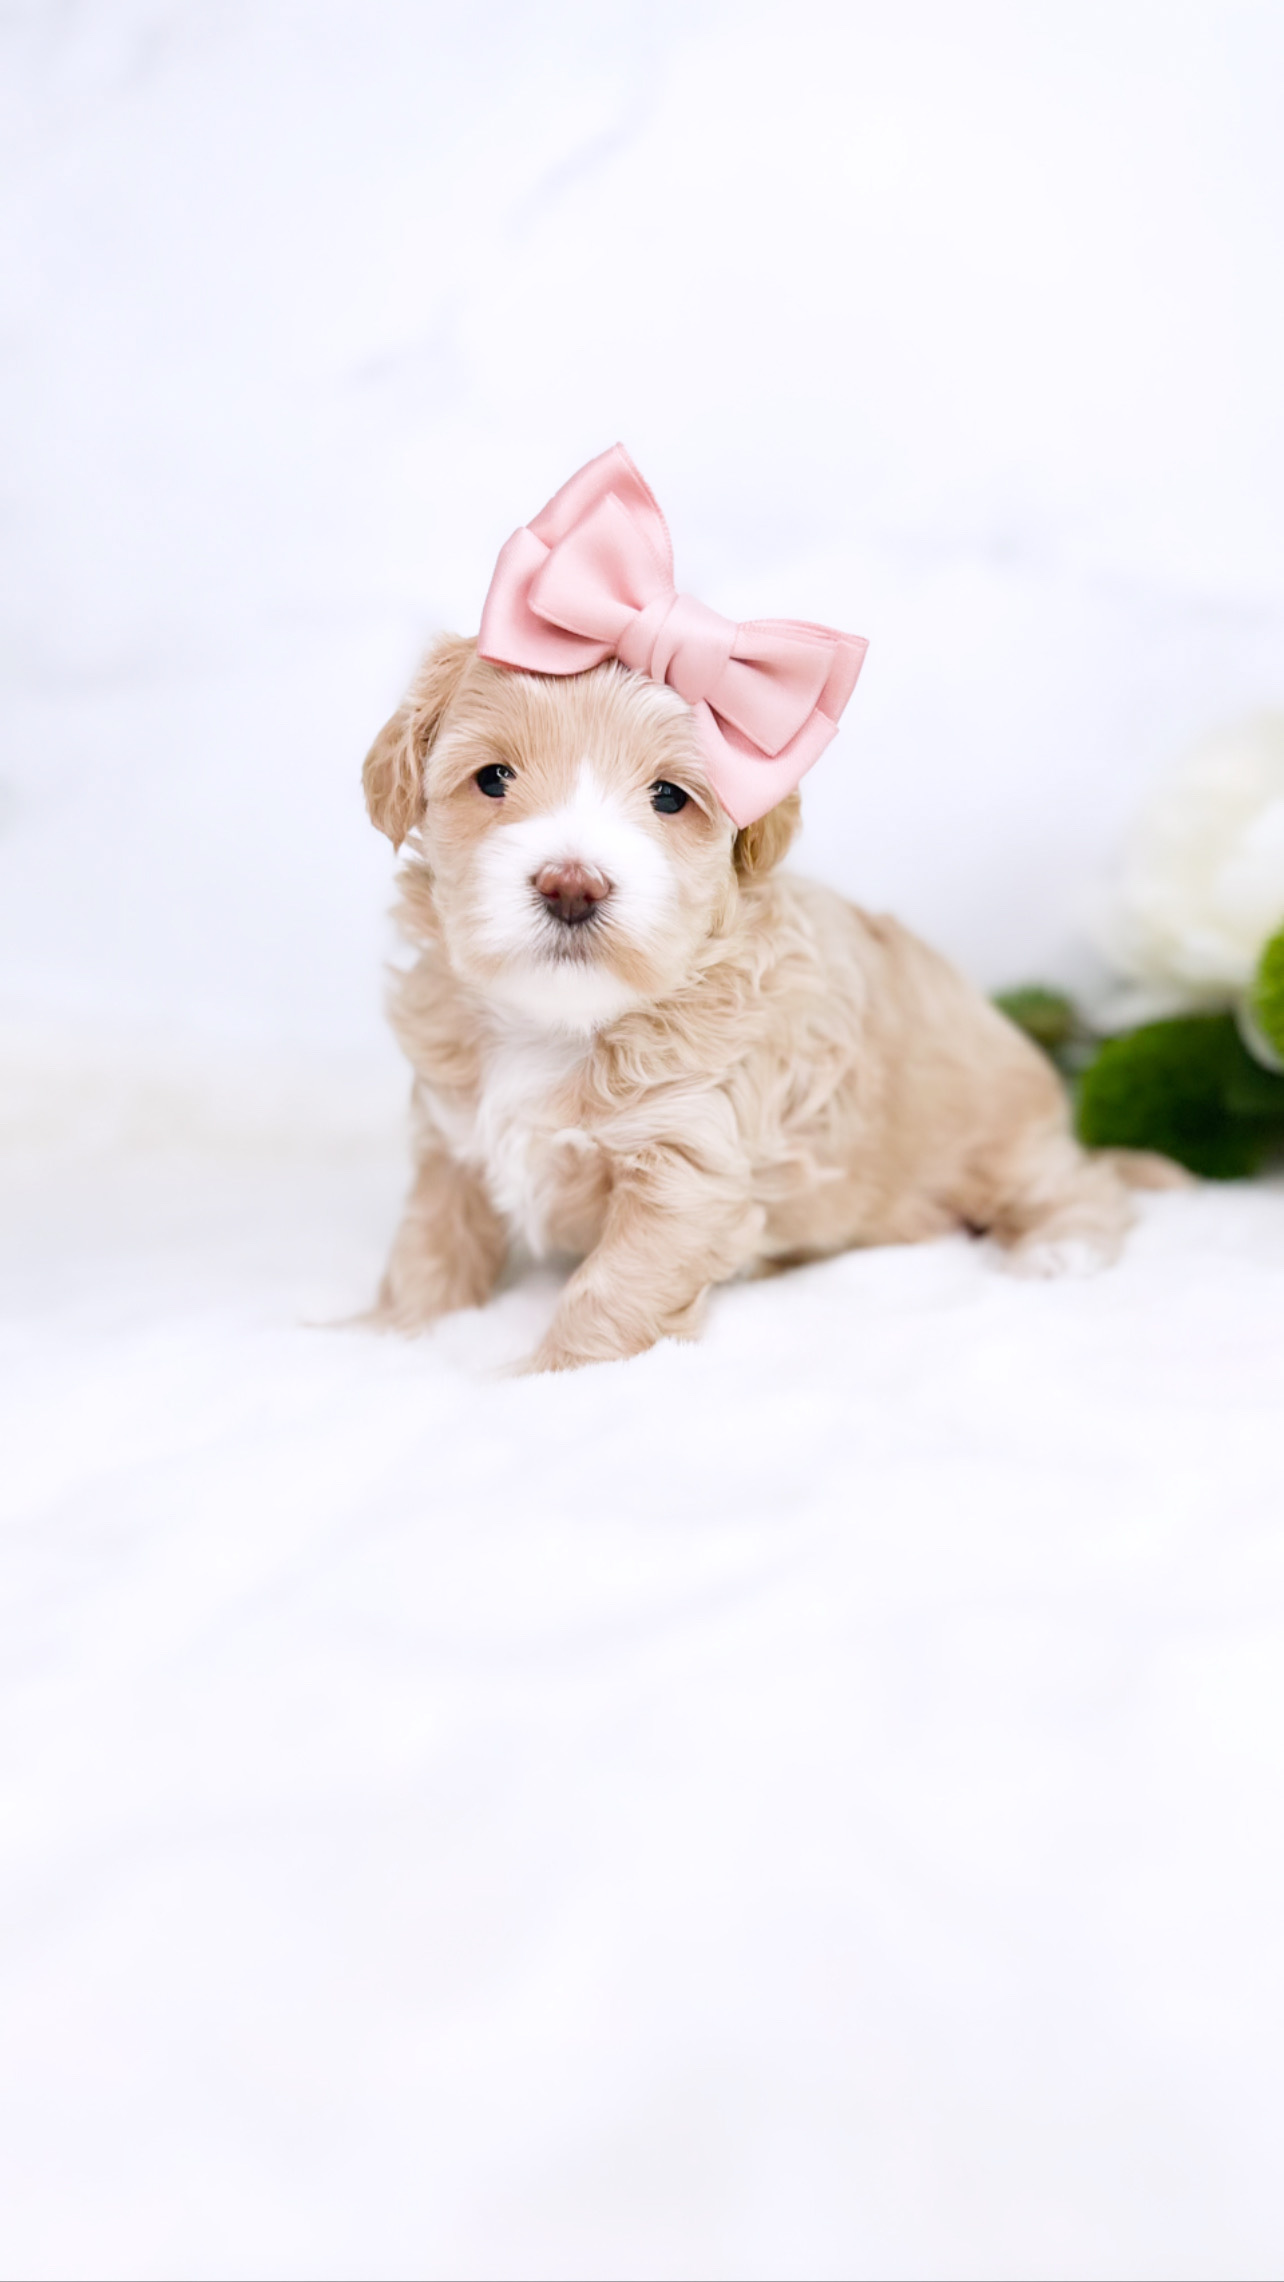 A small puppy with a pink bow adorning its head, looking adorable and charming.